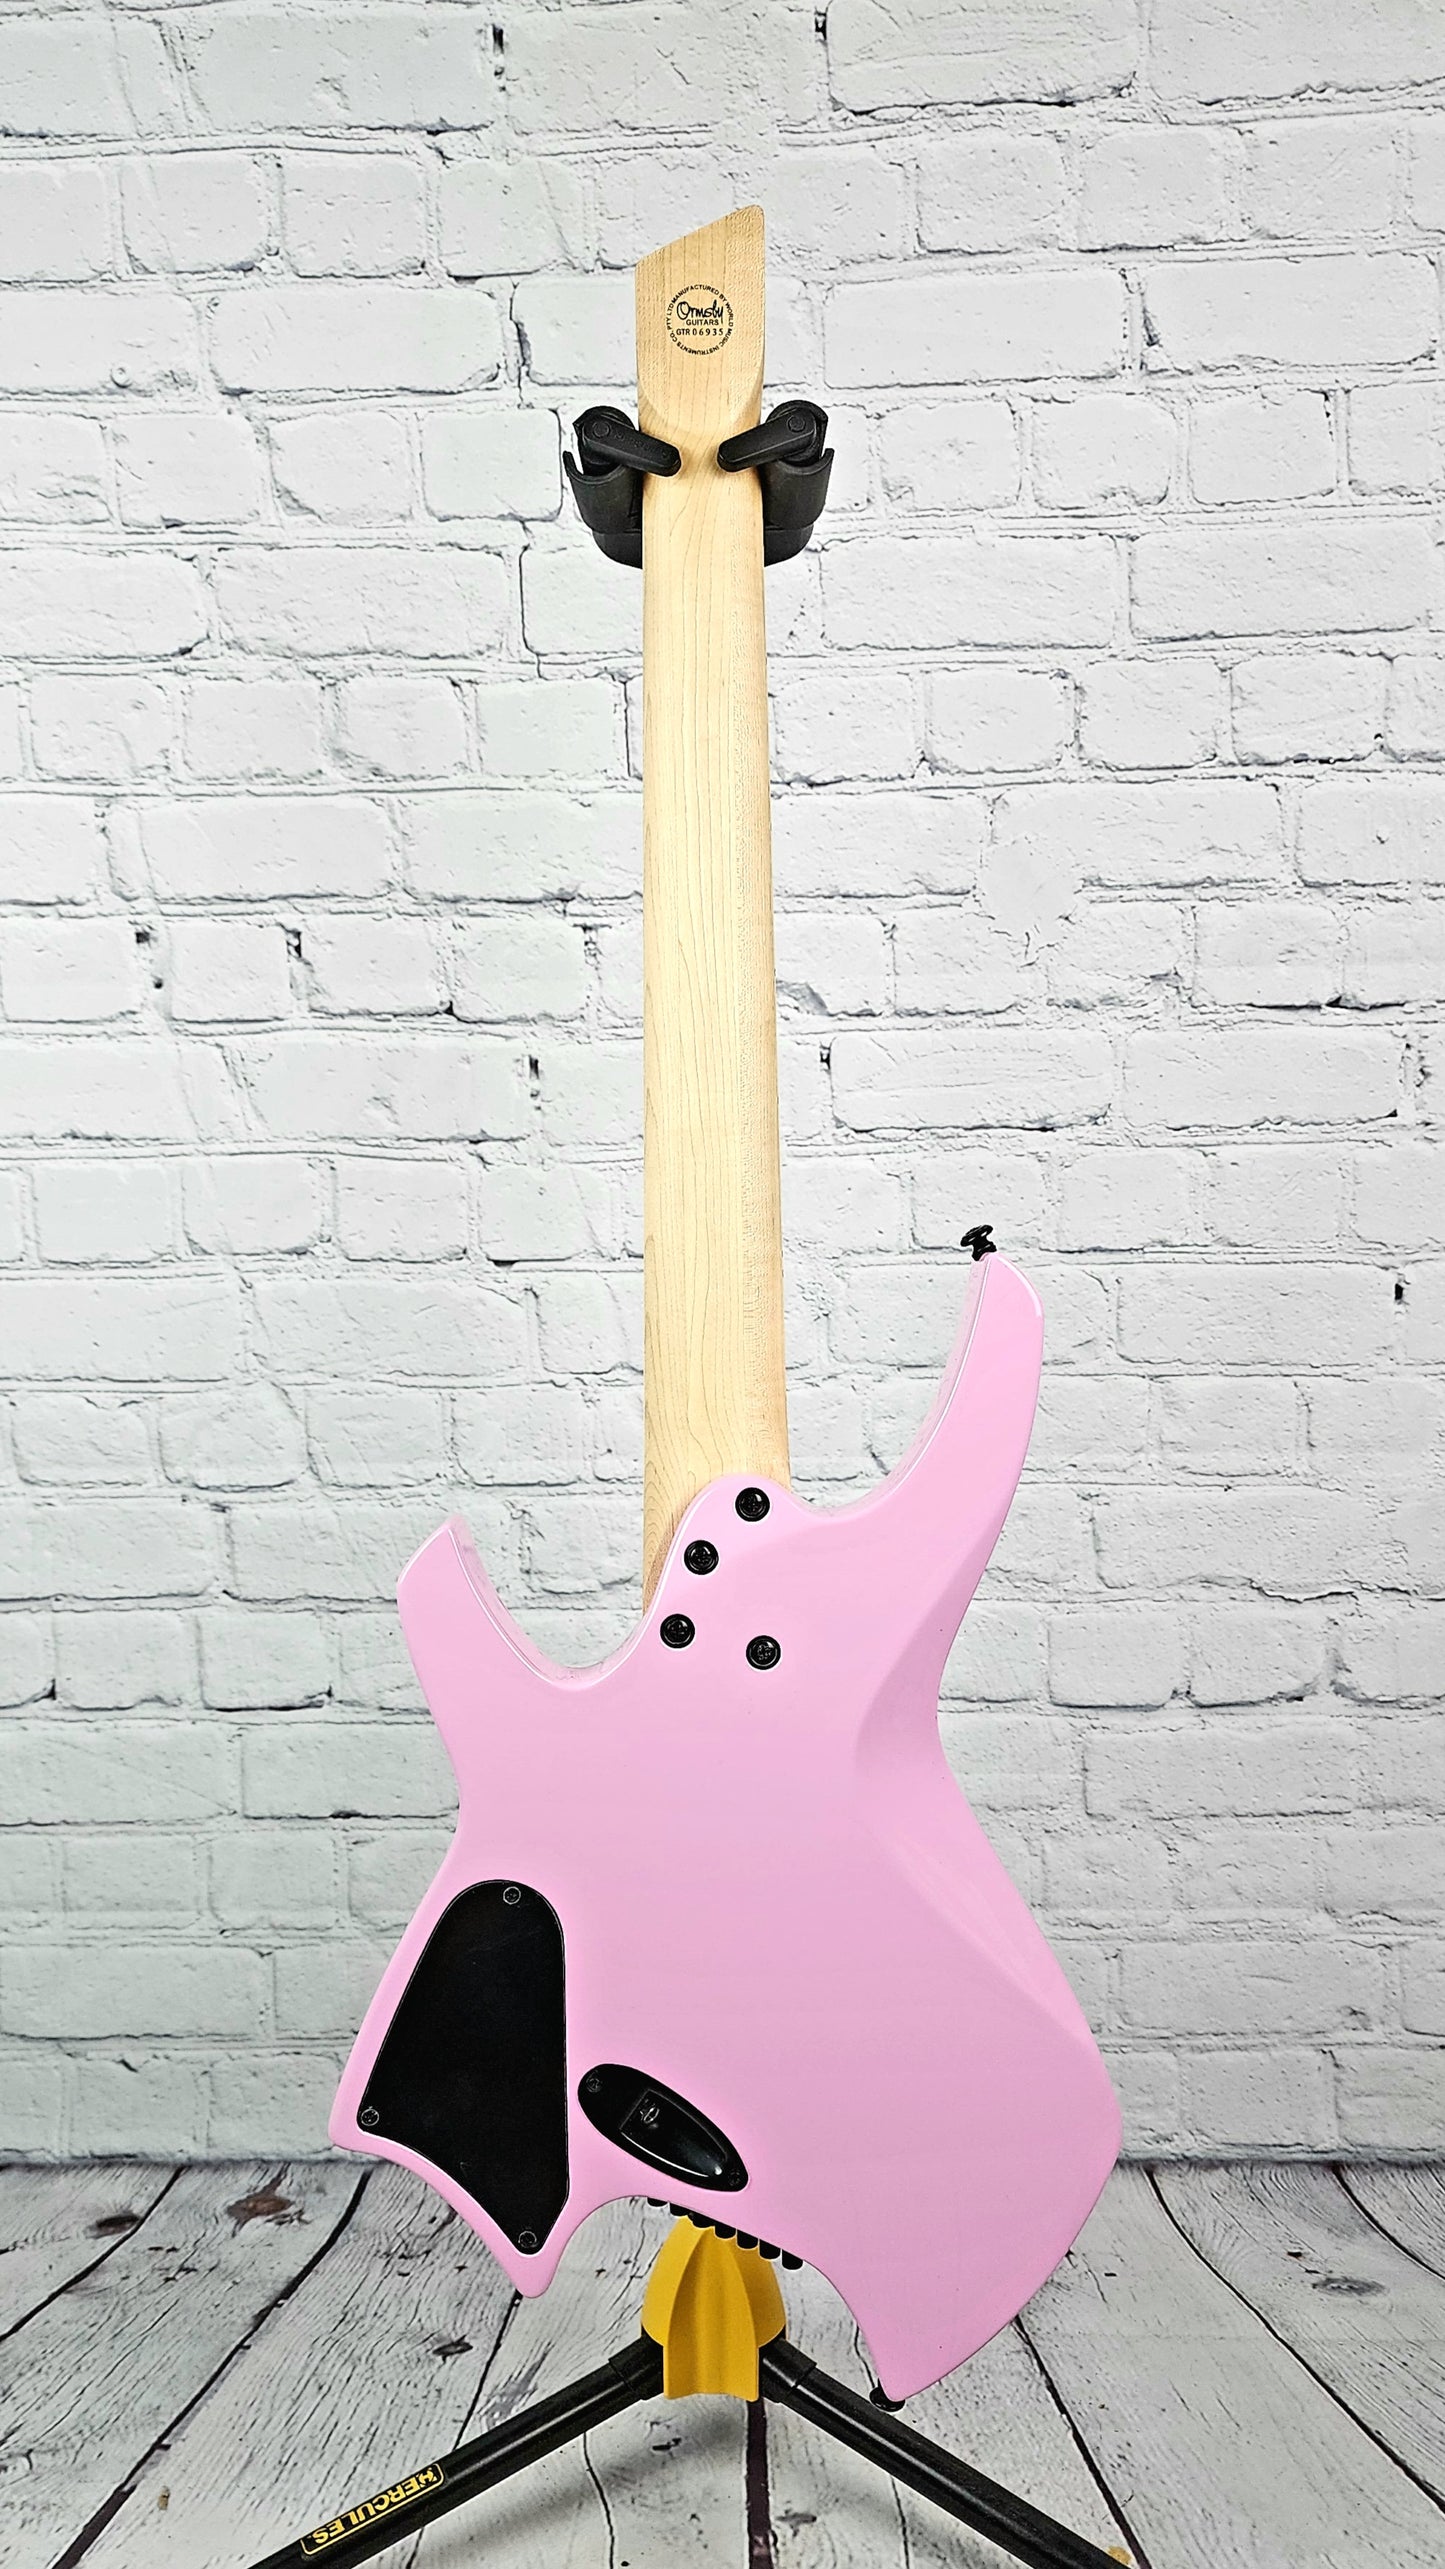 Ormsby Guitars Goliath GTR 7 String Multiscale Electric Guitar Shell Pink